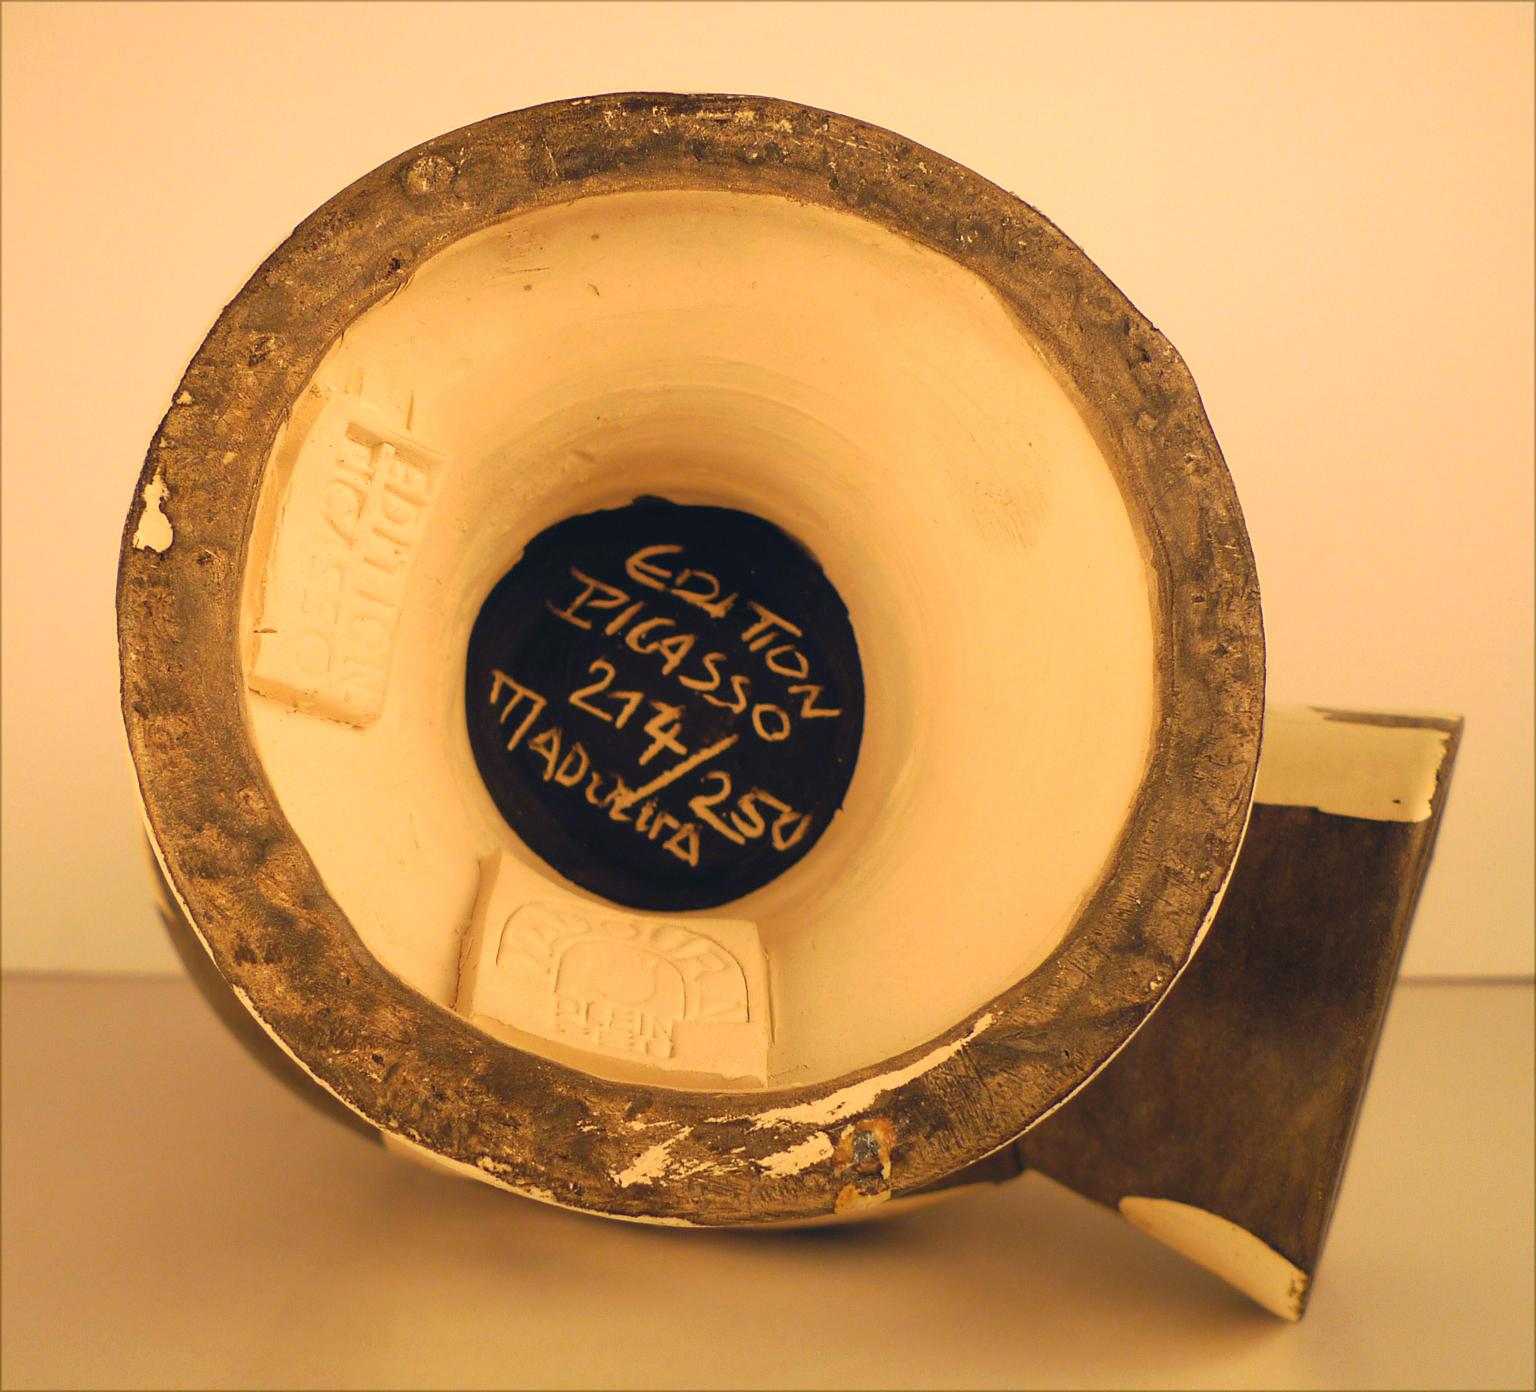 Chouette (A.R. 603), 1969. Ceramic Stamped 'Madoura Plein Feu / Edition Picasso' For Sale 1